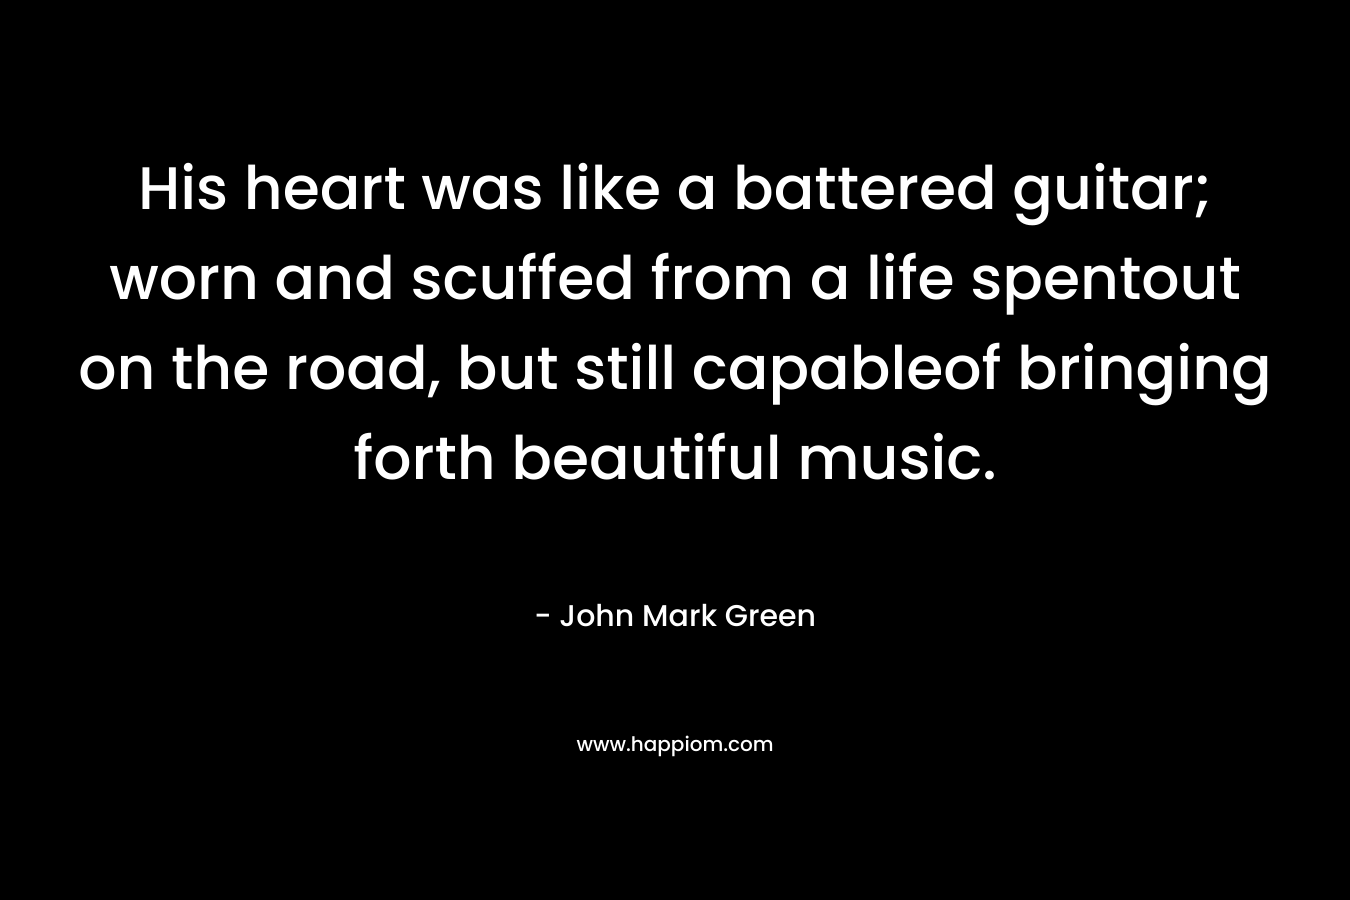 His heart was like a battered guitar; worn and scuffed from a life spentout on the road, but still capableof bringing forth beautiful music.